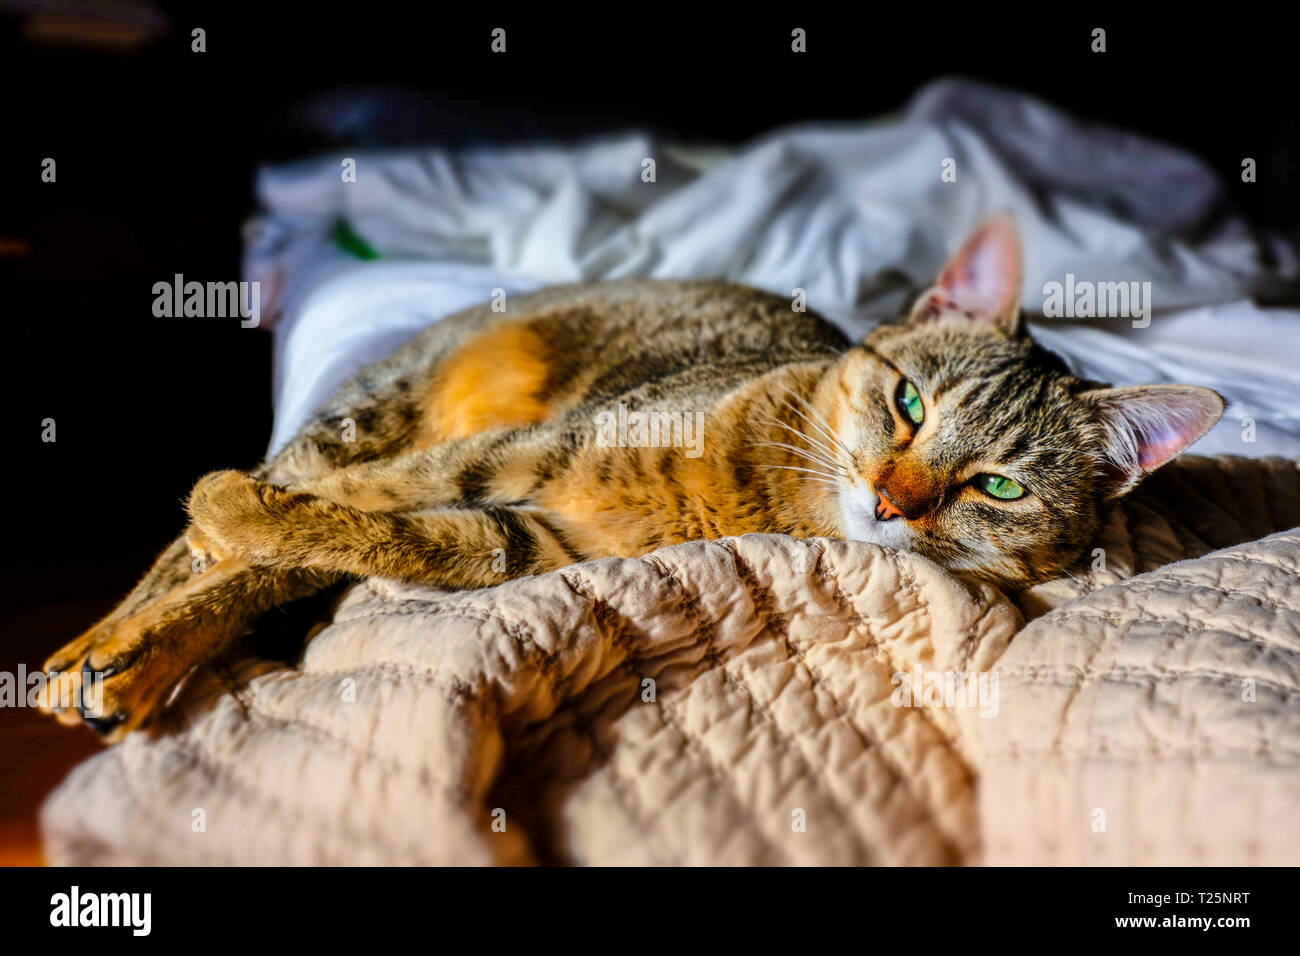 Cat resting in a bed. Stock Photo